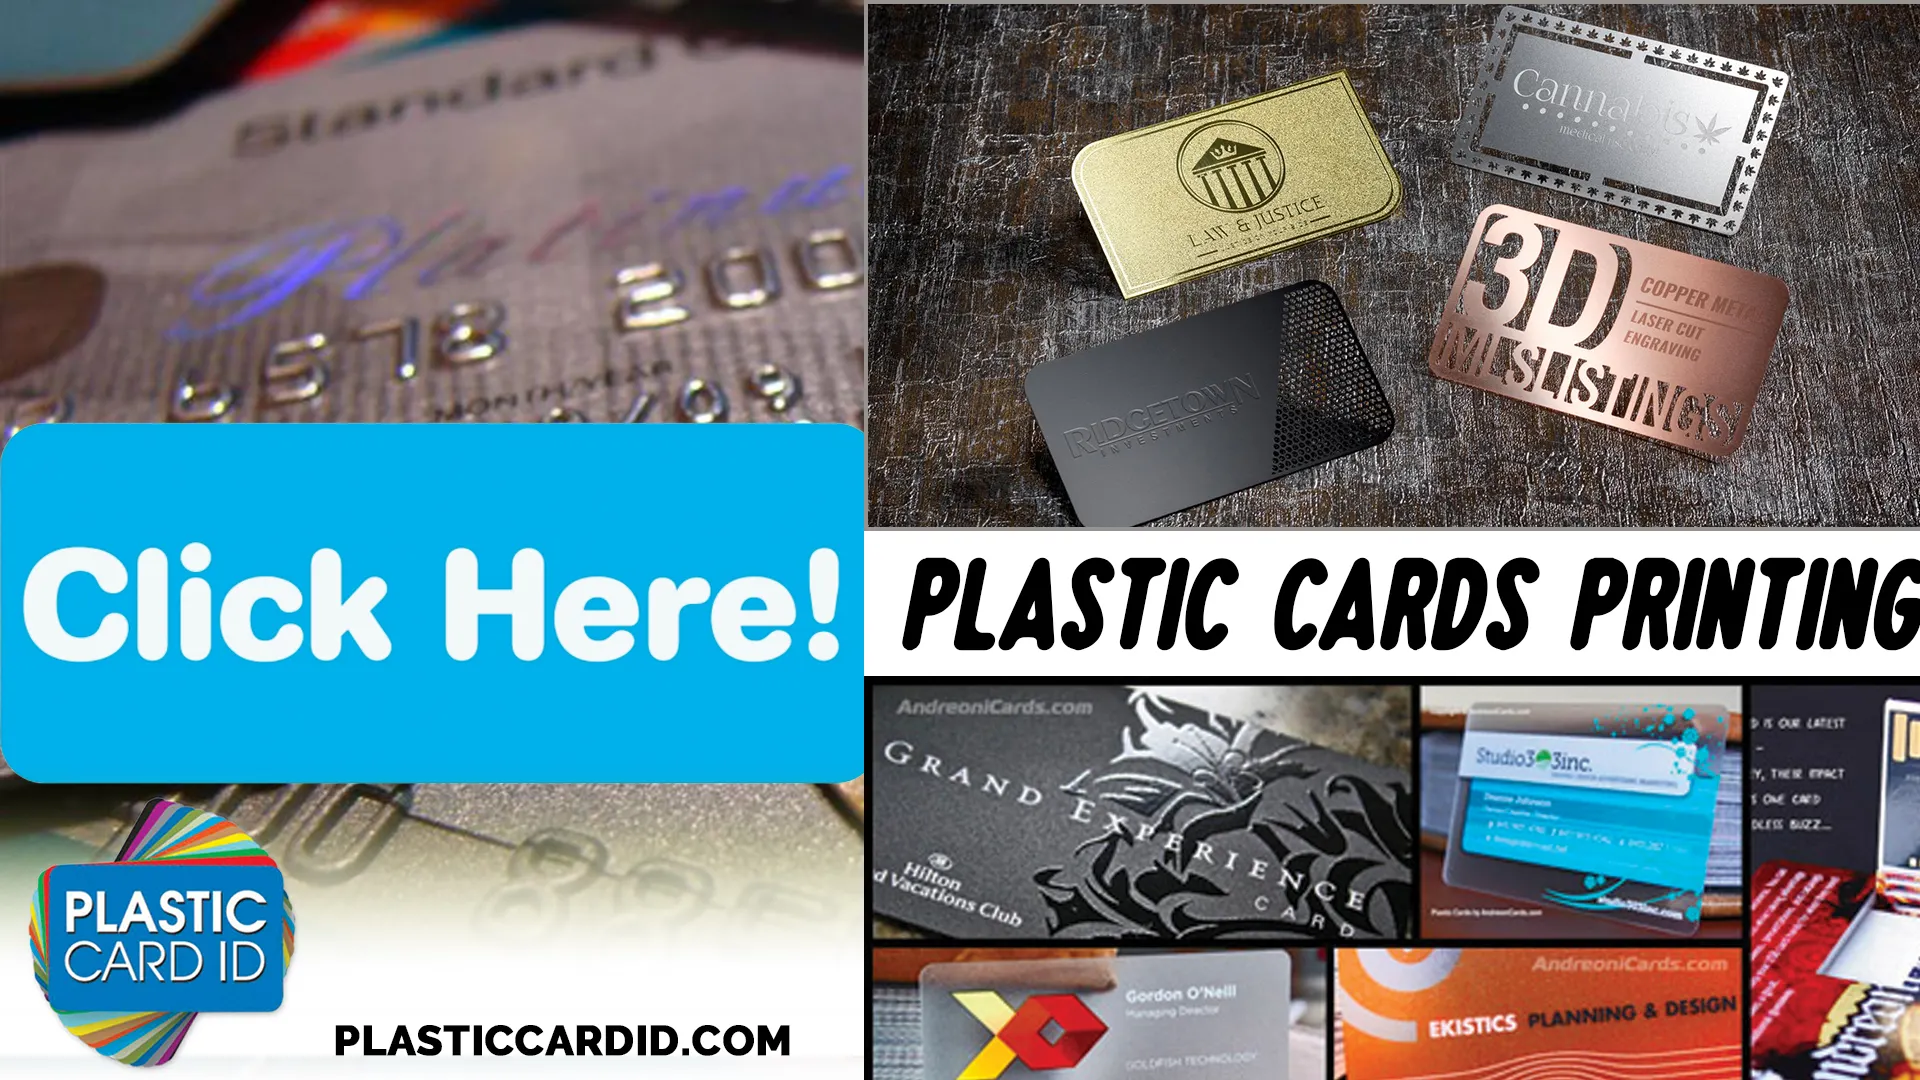 Welcome to the World of Advanced Contactless Card Technology at Plastic Card ID




